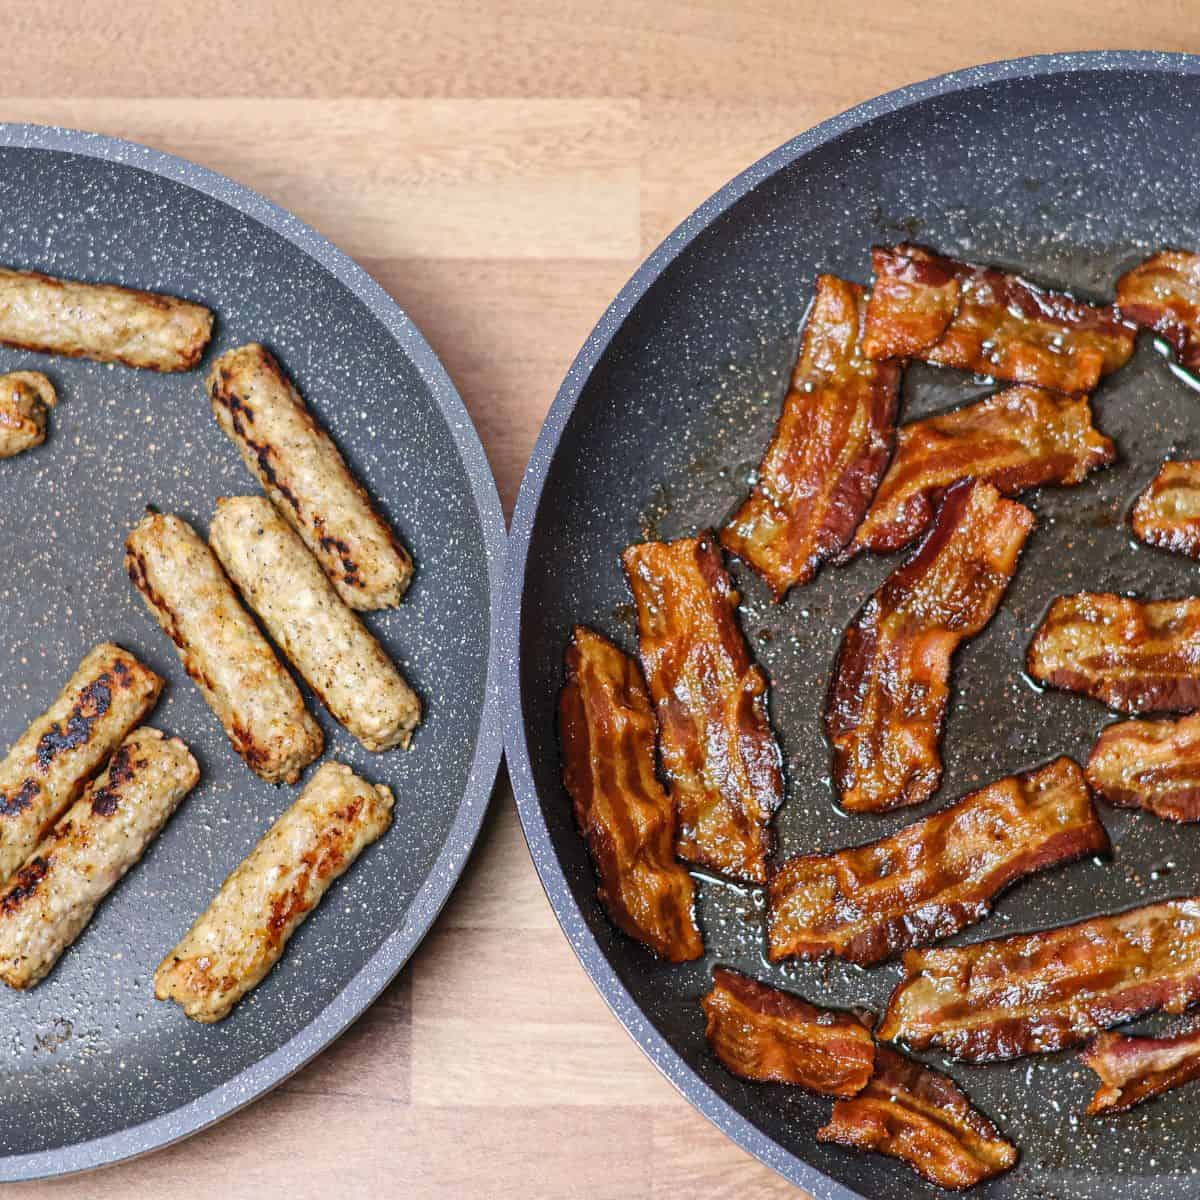 A non-stick skillet with turkey sausage links and bacon strips being cooked, showing the sausage browned and bacon crispy.